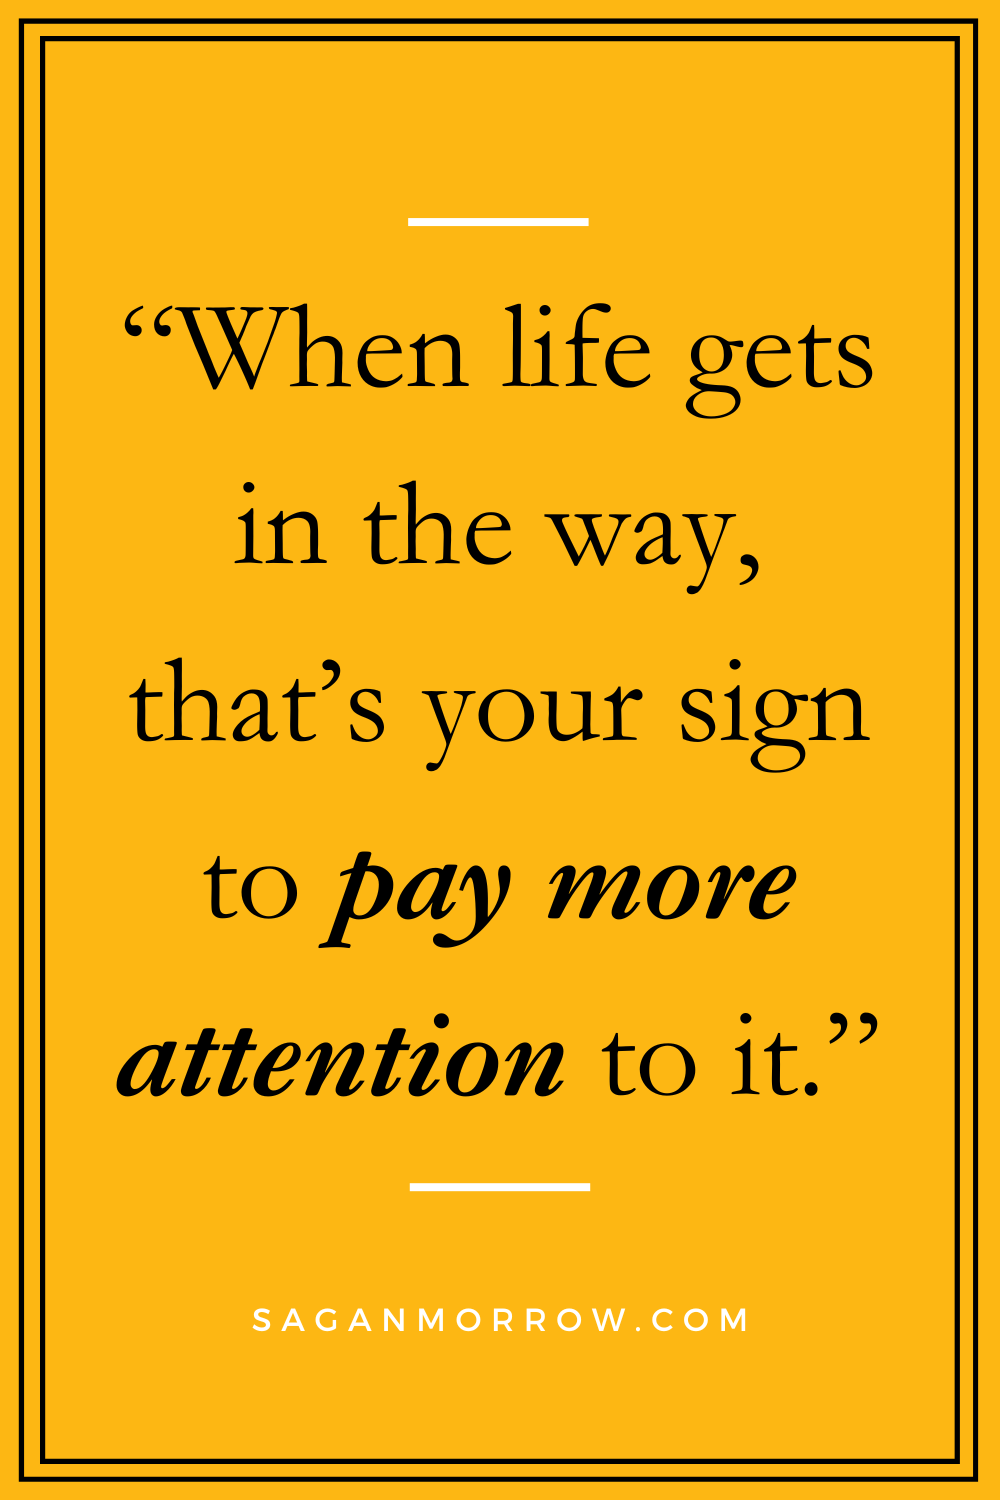 "When life gets in the way, that's your sign to pay more attention to it." life gets in the way quotes